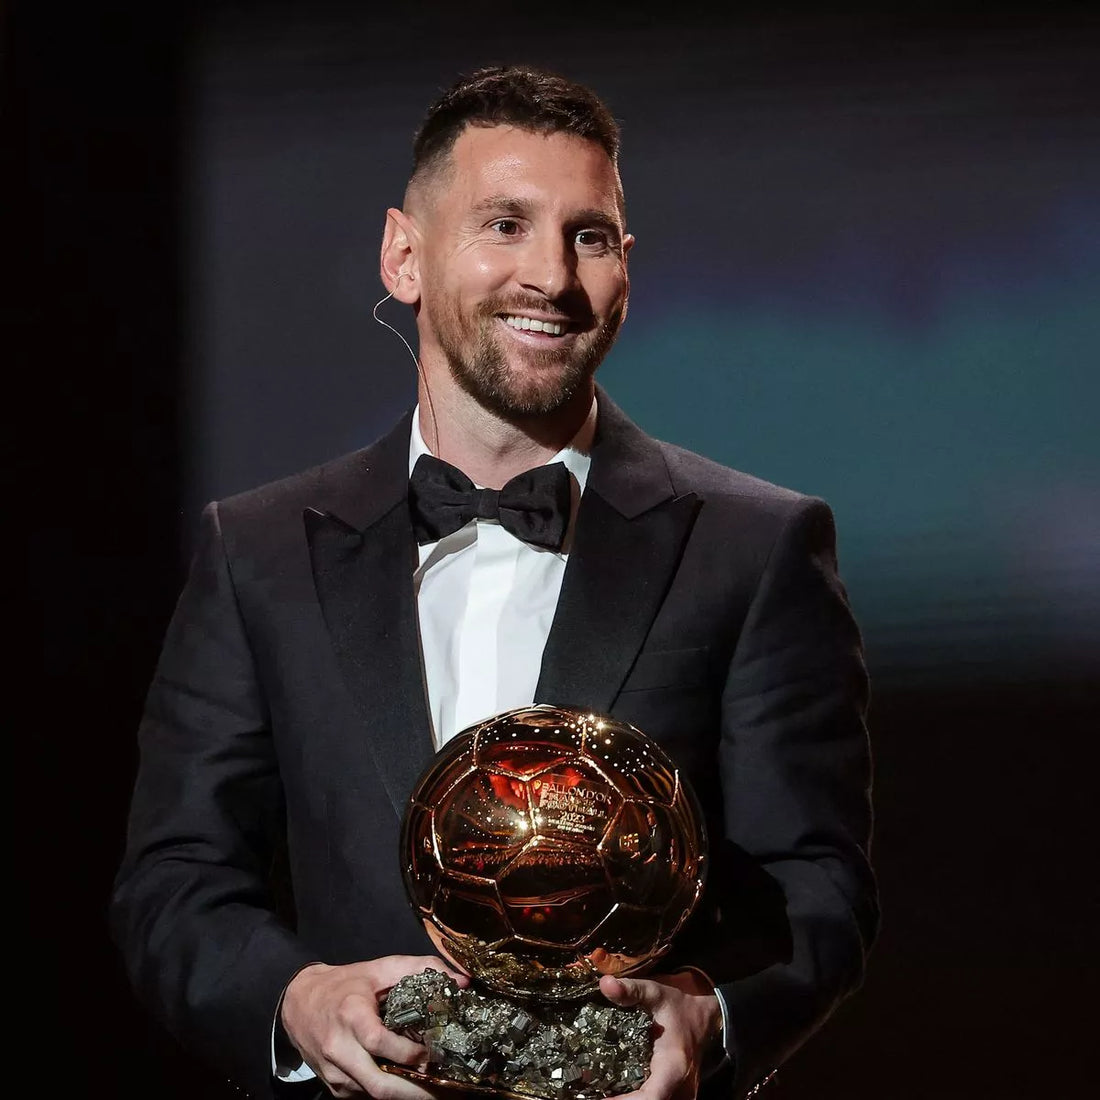 Was the Ballon d'Or rigged in Messi's favor?